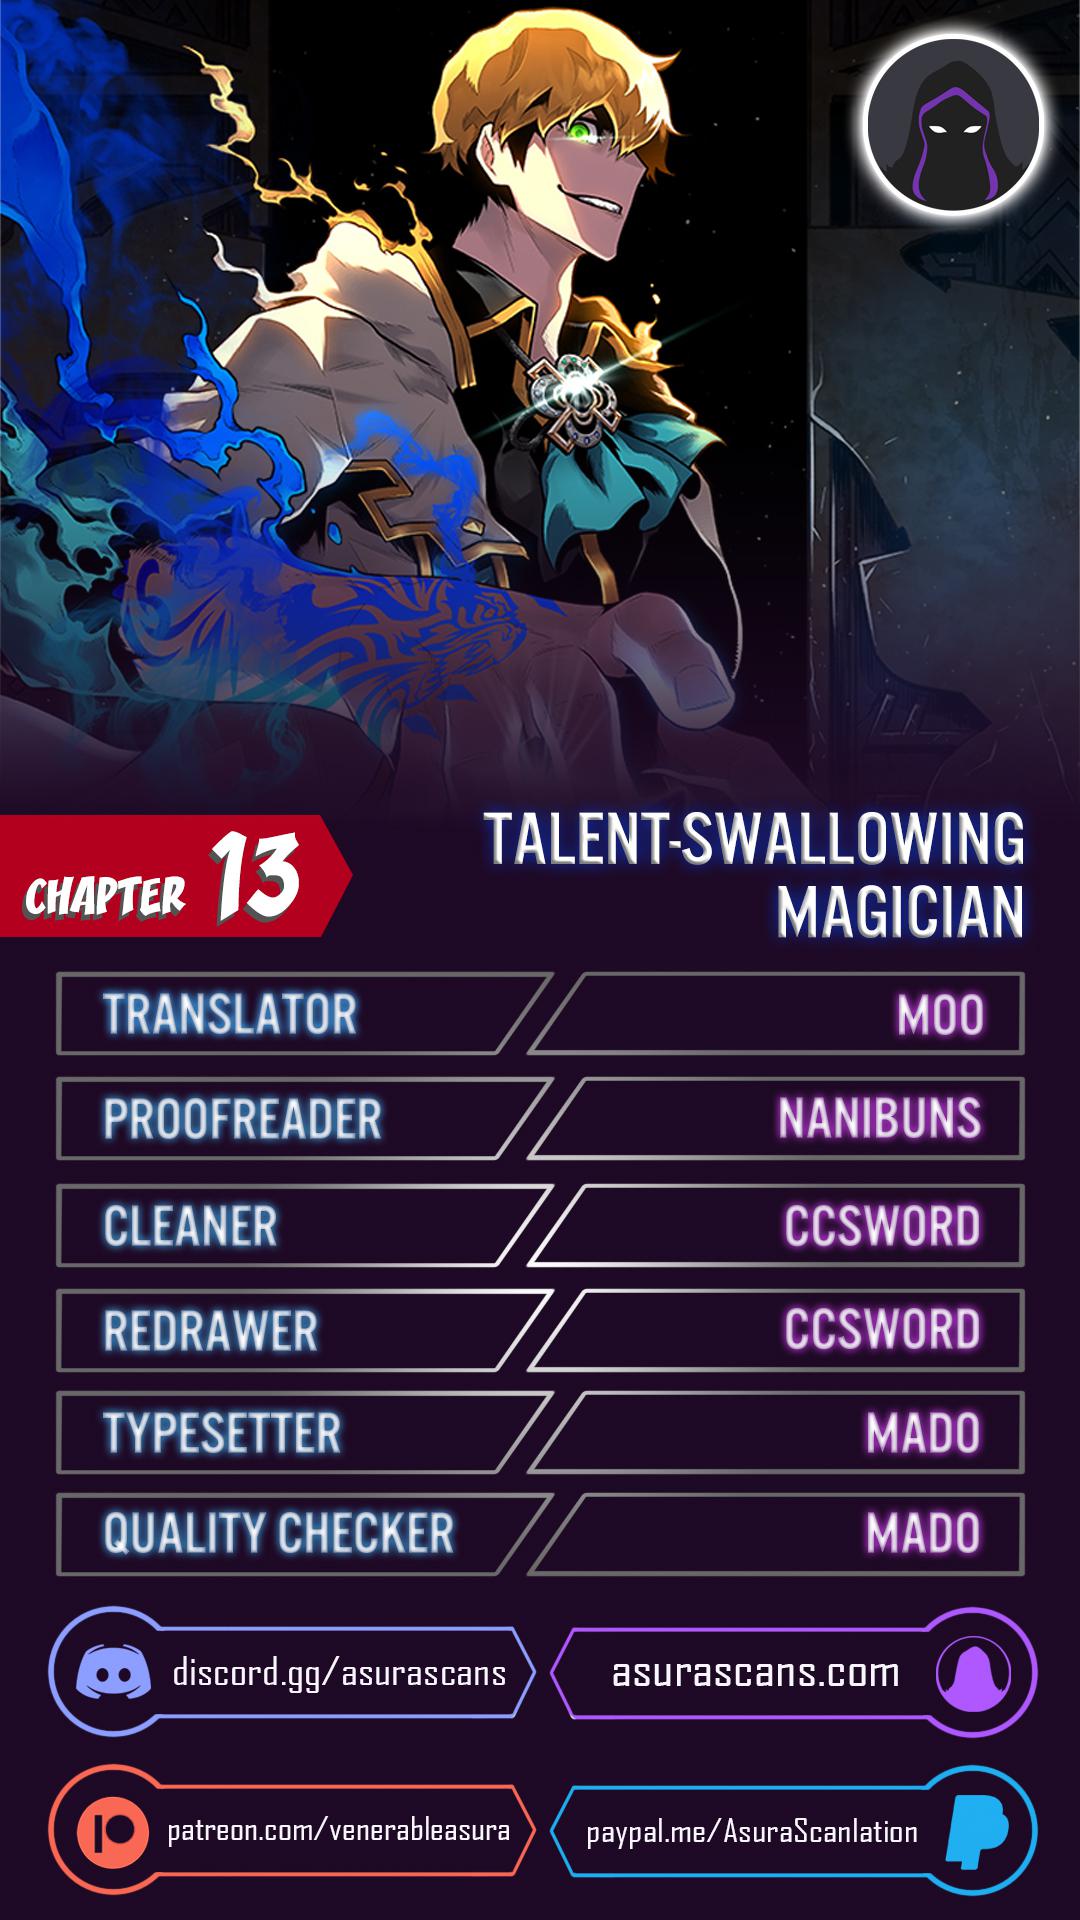 Talent-Swallowing Magician, Chapter 13 image 1